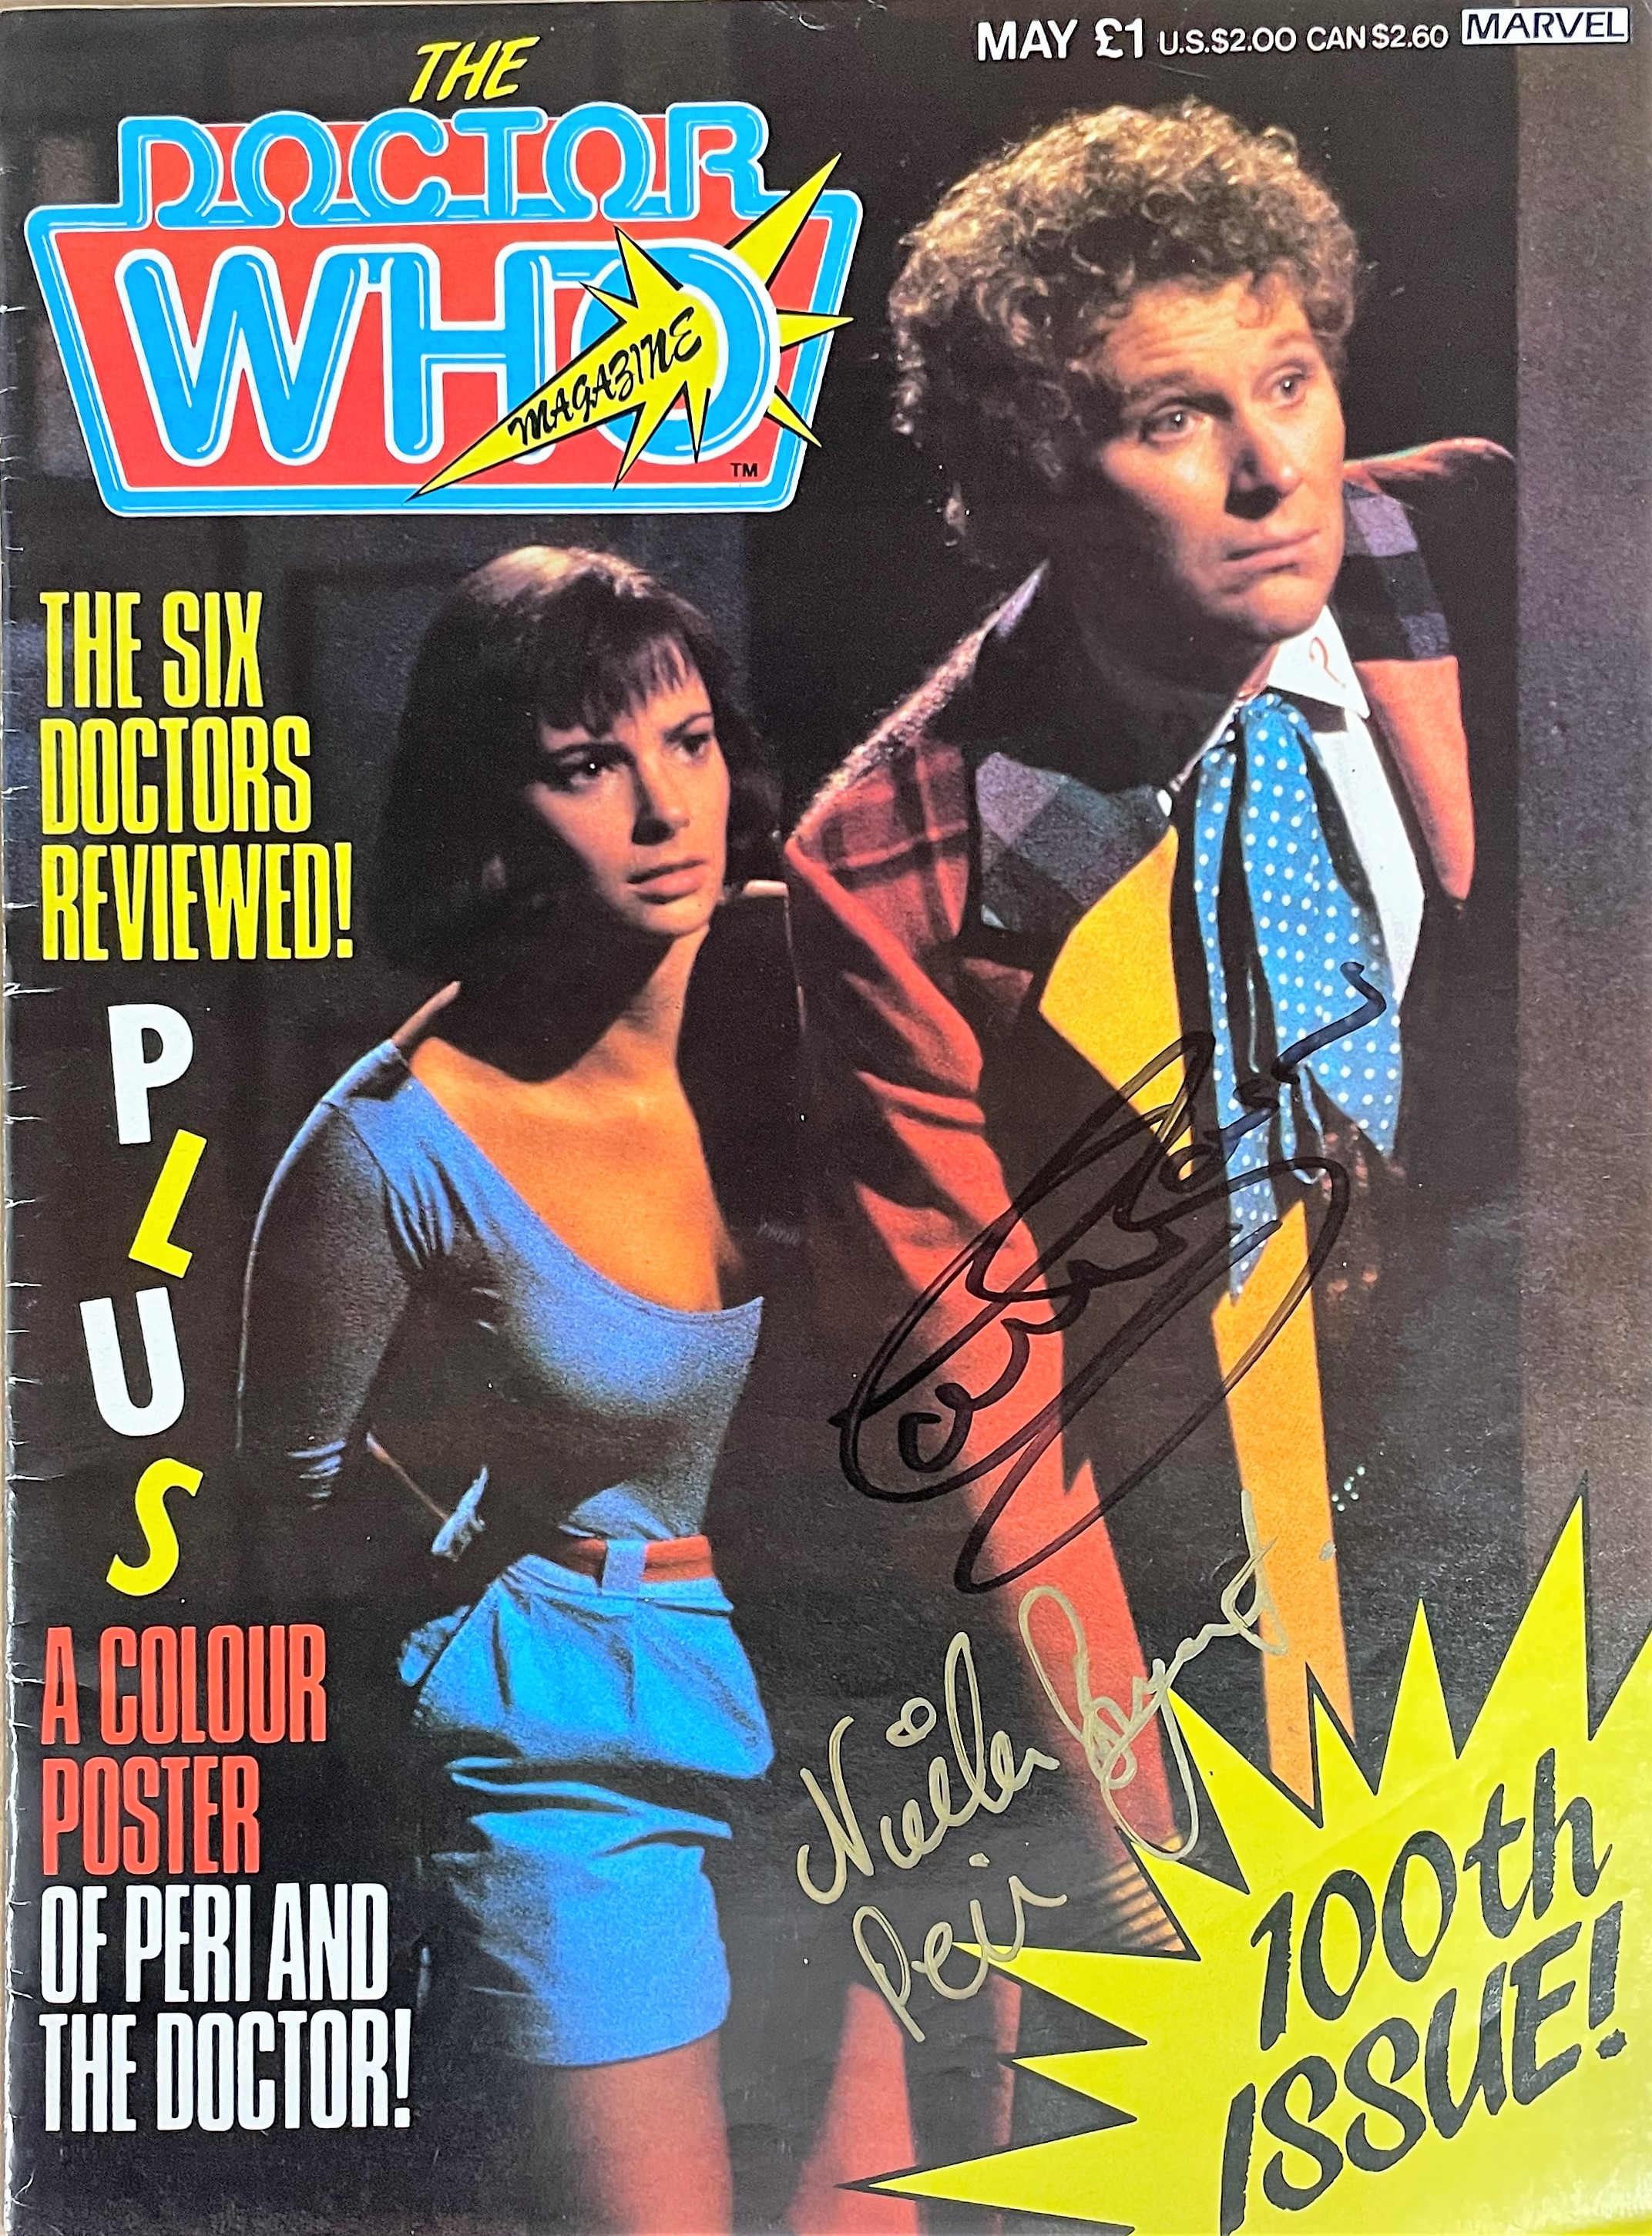 Dr Who 100th Issue Magazine 1985. Handsigned by 6th Doctor Colin Baker and Nicola Bryant (Peri